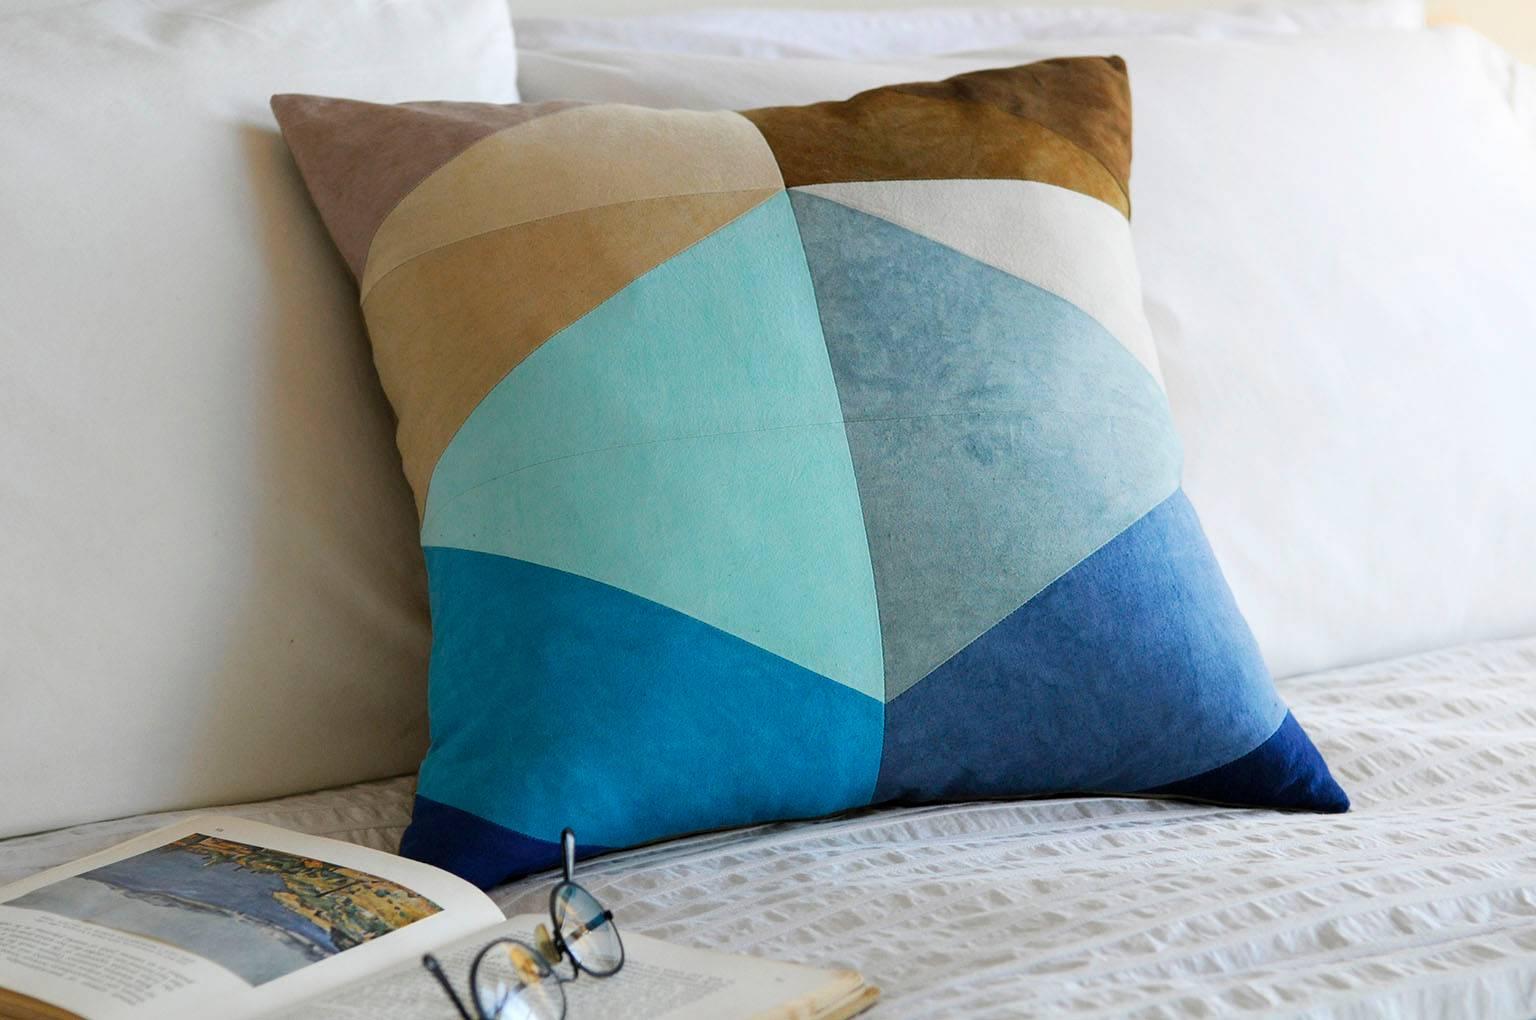 Vibrant New England colors in traditional American quilting patterns. 

With its distinct fabrics and careful, precise construction, each pillow is a stunning work of art. DUNN works closely with a fabric supplier and local quilter to Craft these